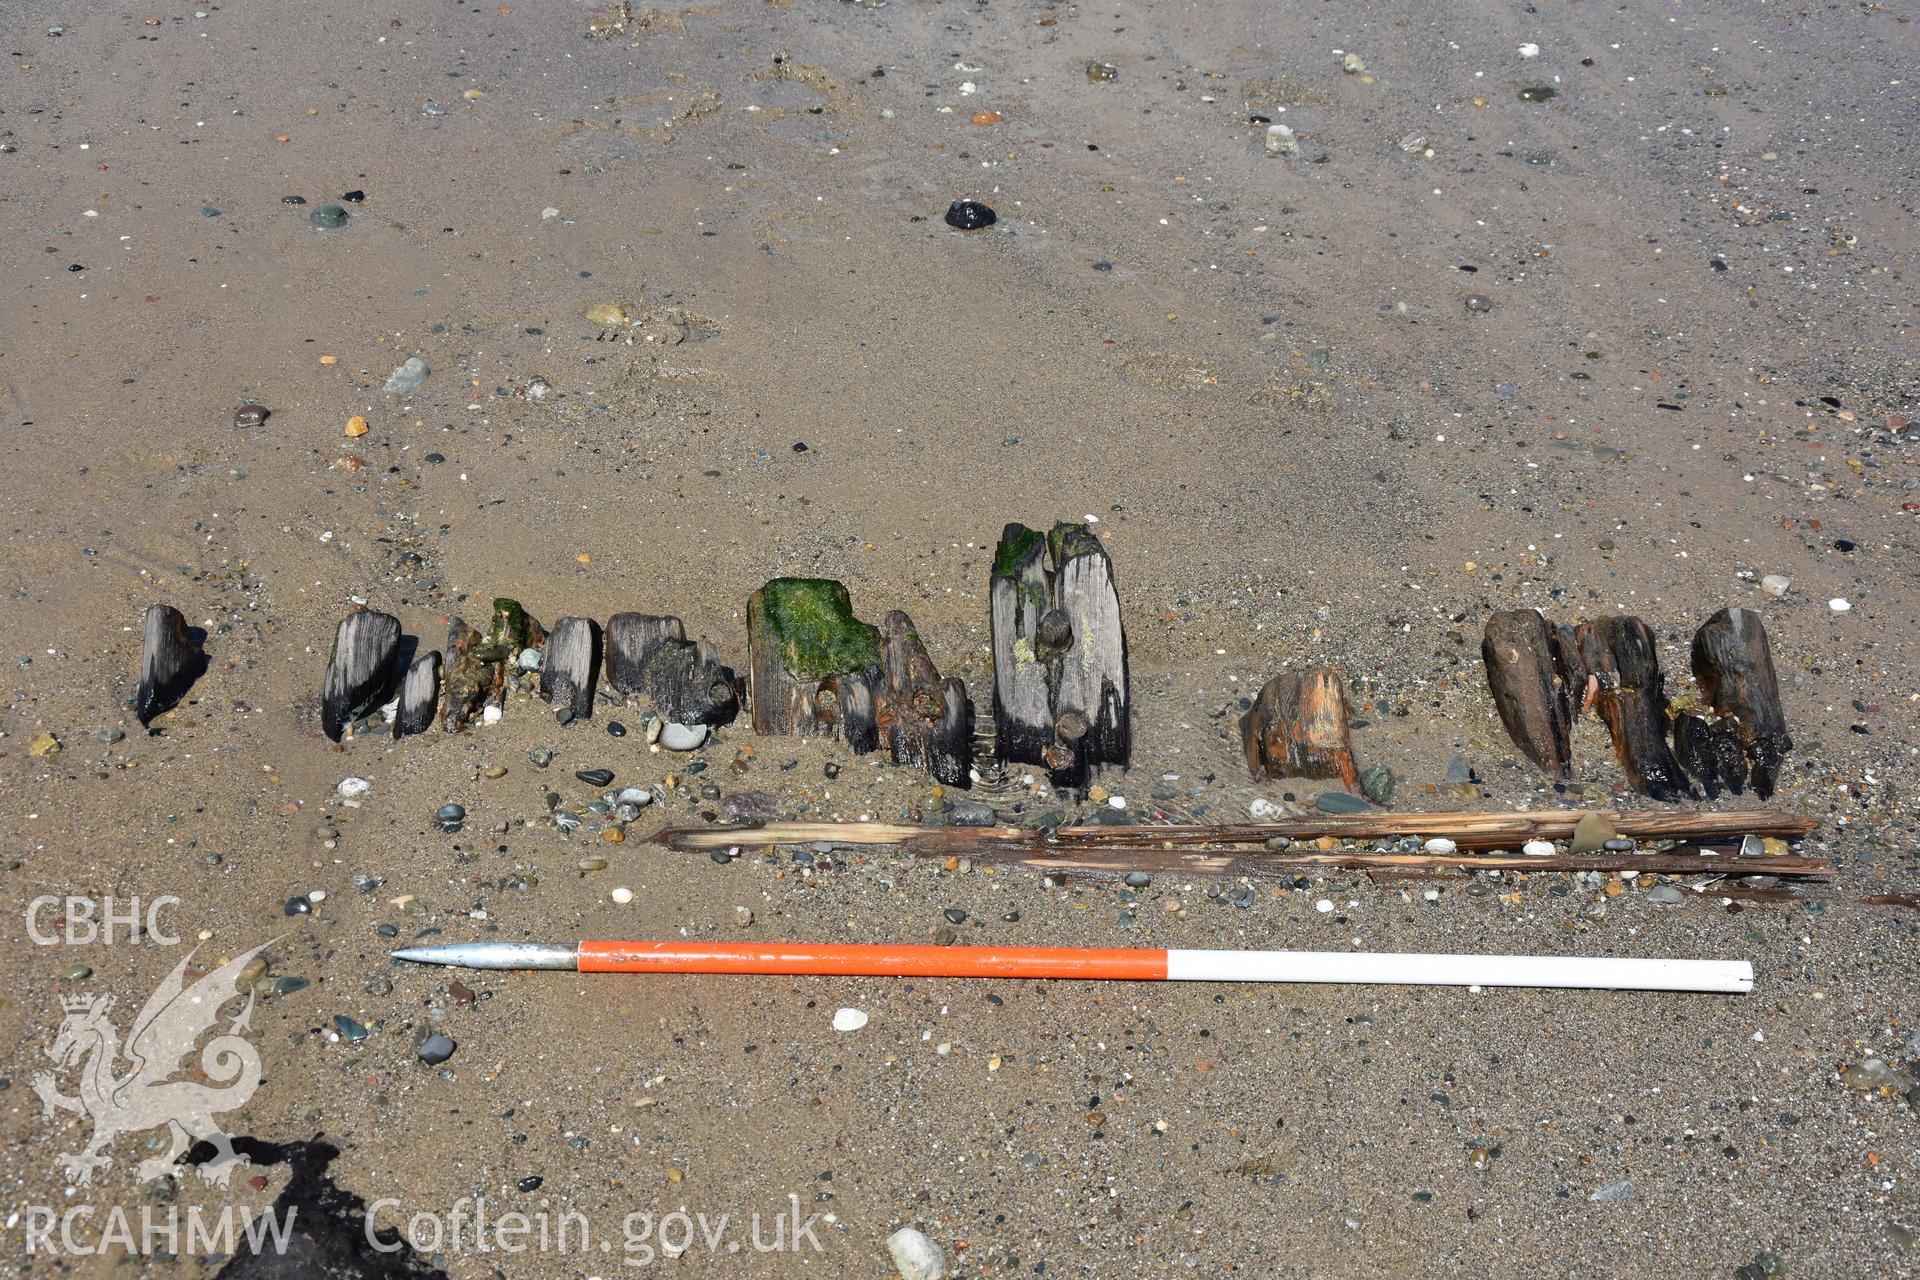 Baseline photo survey of unnamed wreck on The Warren sands, thought to be the FOSIL, taken at 0.9m low tide on 26th April 2018. ? Crown: CHERISH PROJECT 2017. Produced with EU funds through the Ireland Wales Co-operation Programme 2014-2020. All material made freely available through the Open Government Licence.